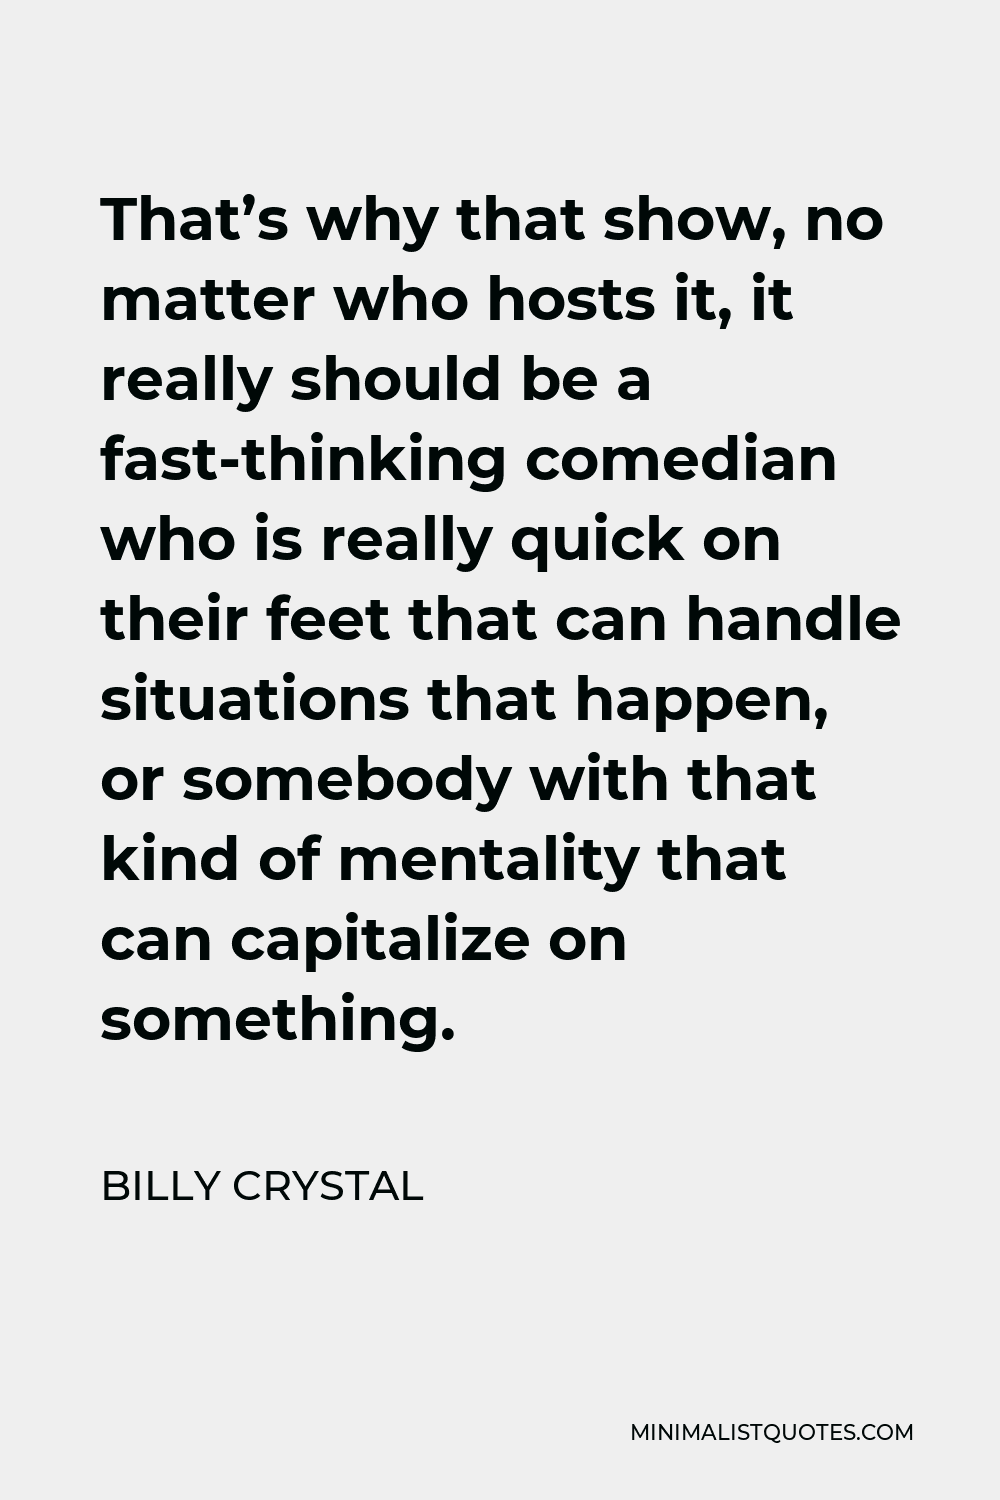 Billy Crystal Quote - That’s why that show, no matter who hosts it, it really should be a fast-thinking comedian who is really quick on their feet that can handle situations that happen, or somebody with that kind of mentality that can capitalize on something.